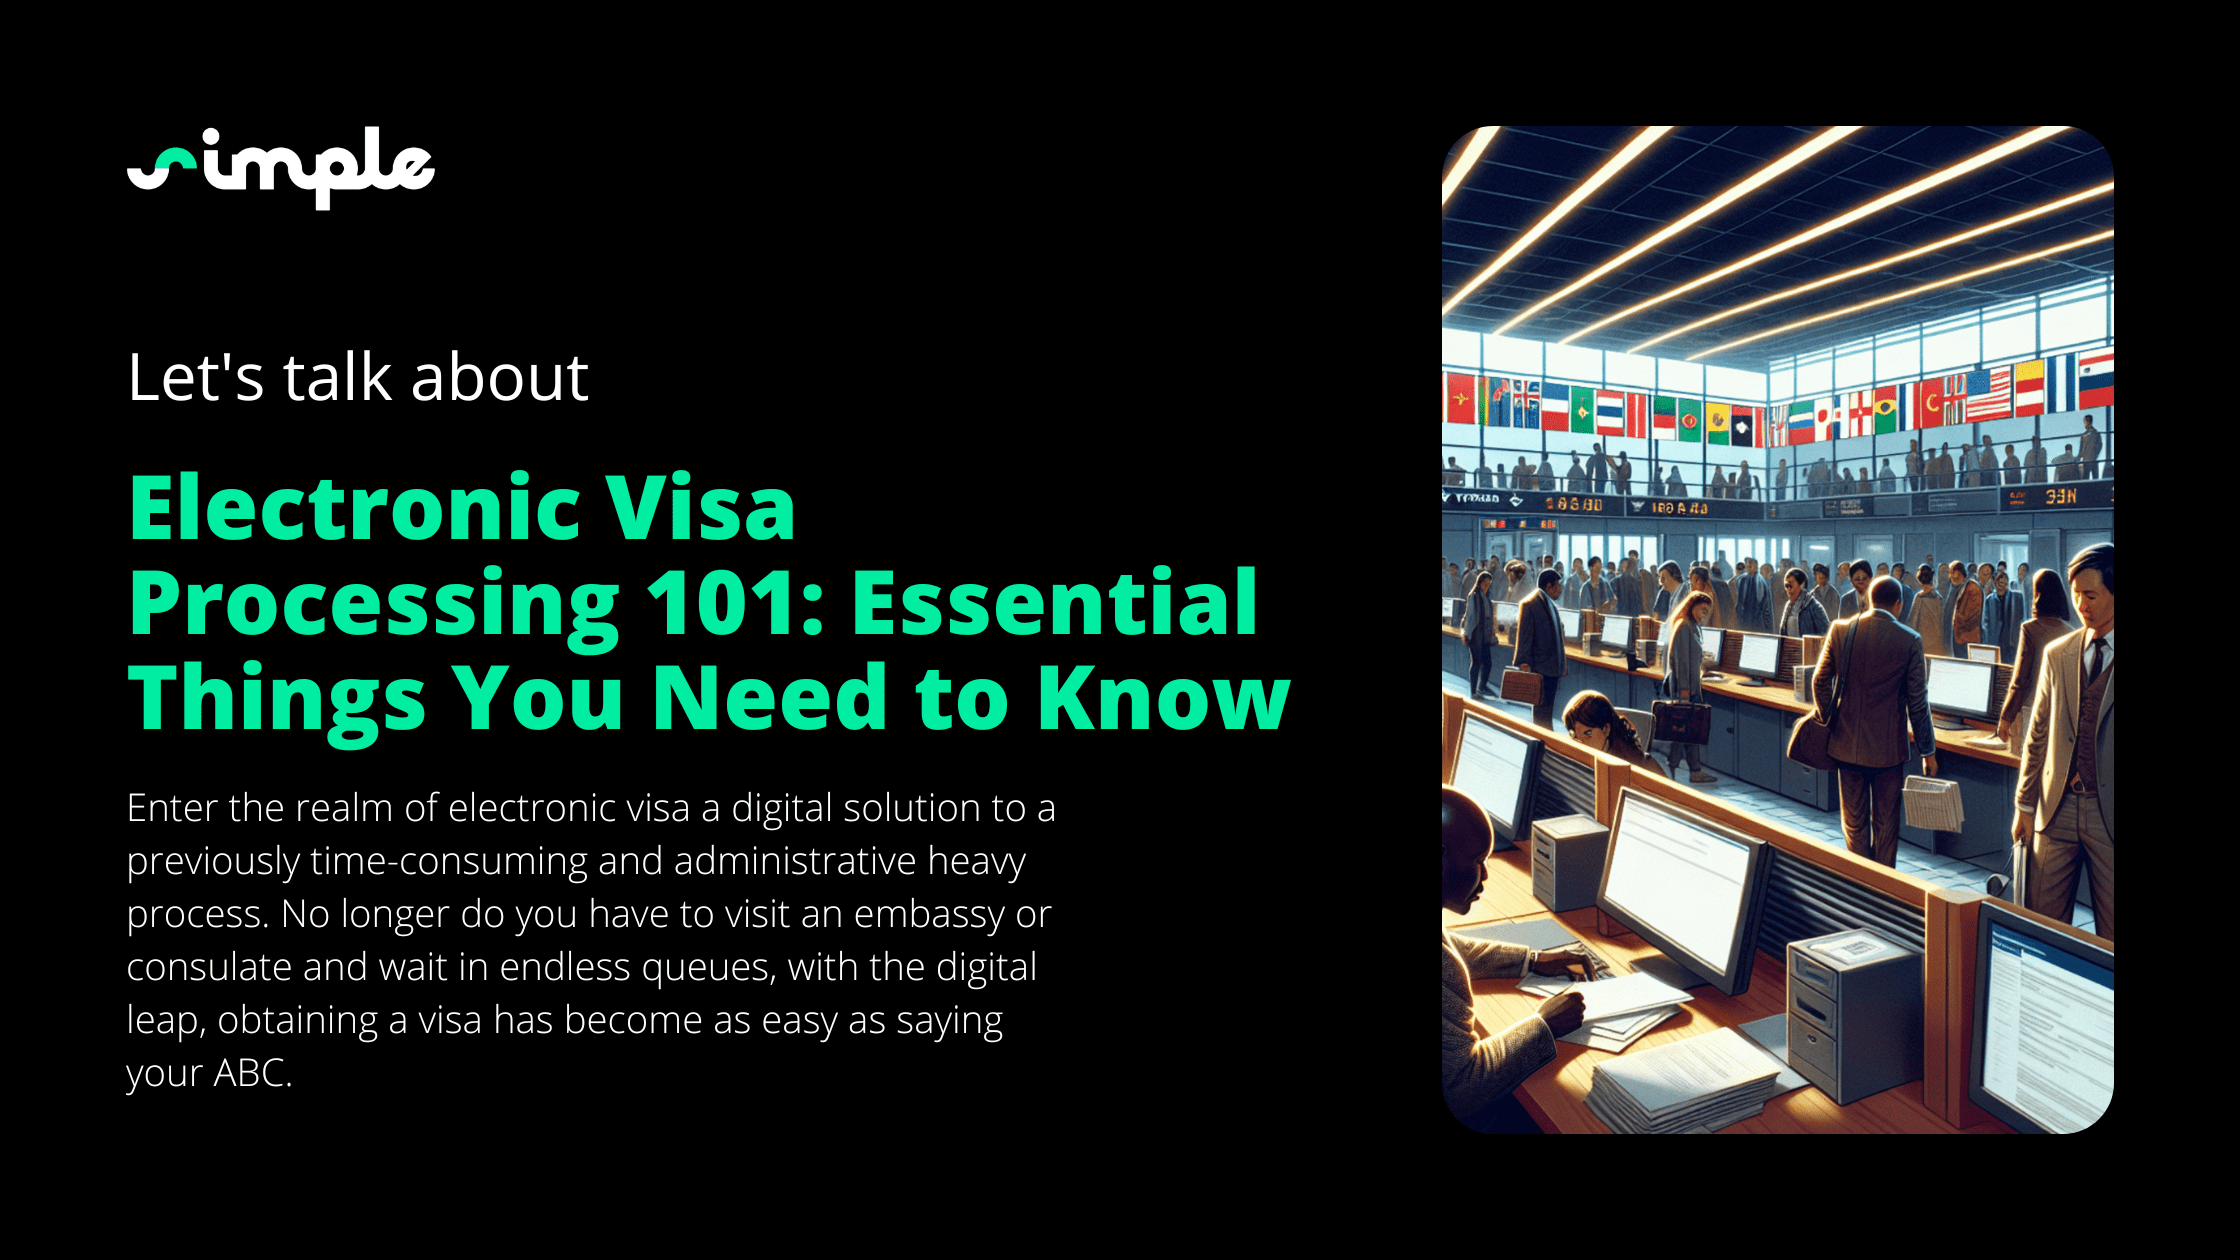 Electronic Visa Processing 101: Essential Things You Need to Know